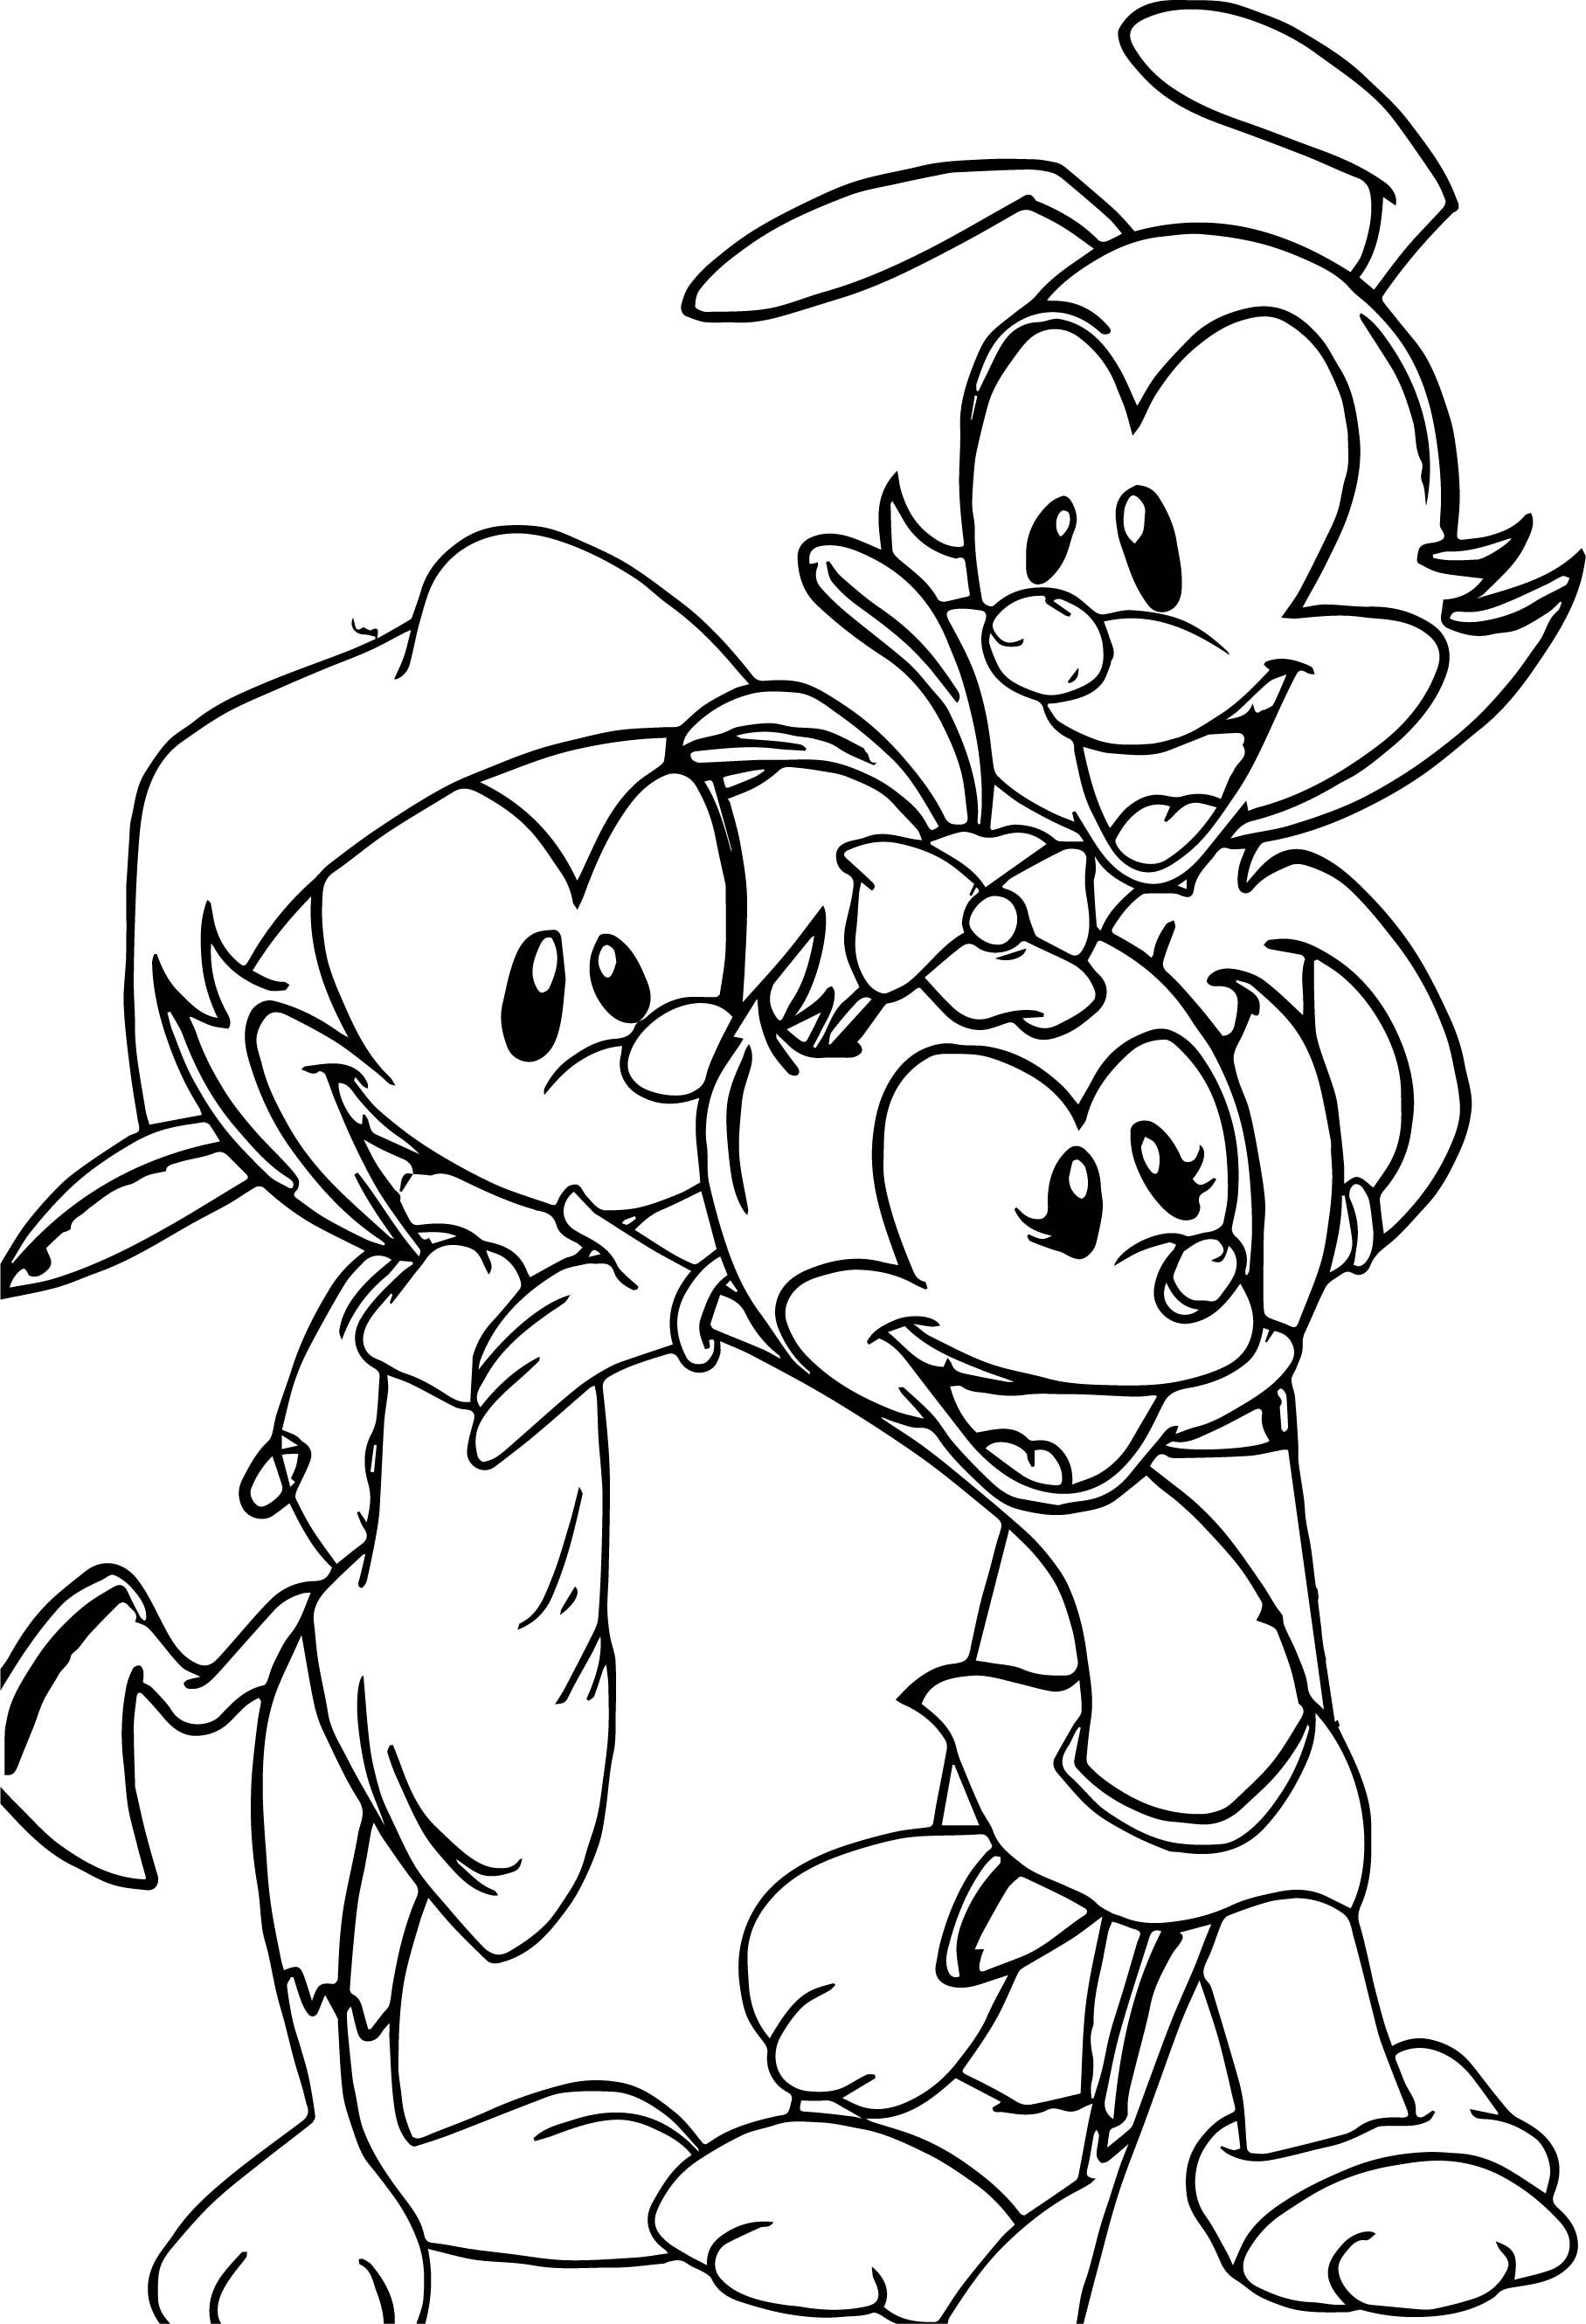 Printable Animaniacs Coloring Pages Pdf For Kids - Animaniacs Coloring Pages